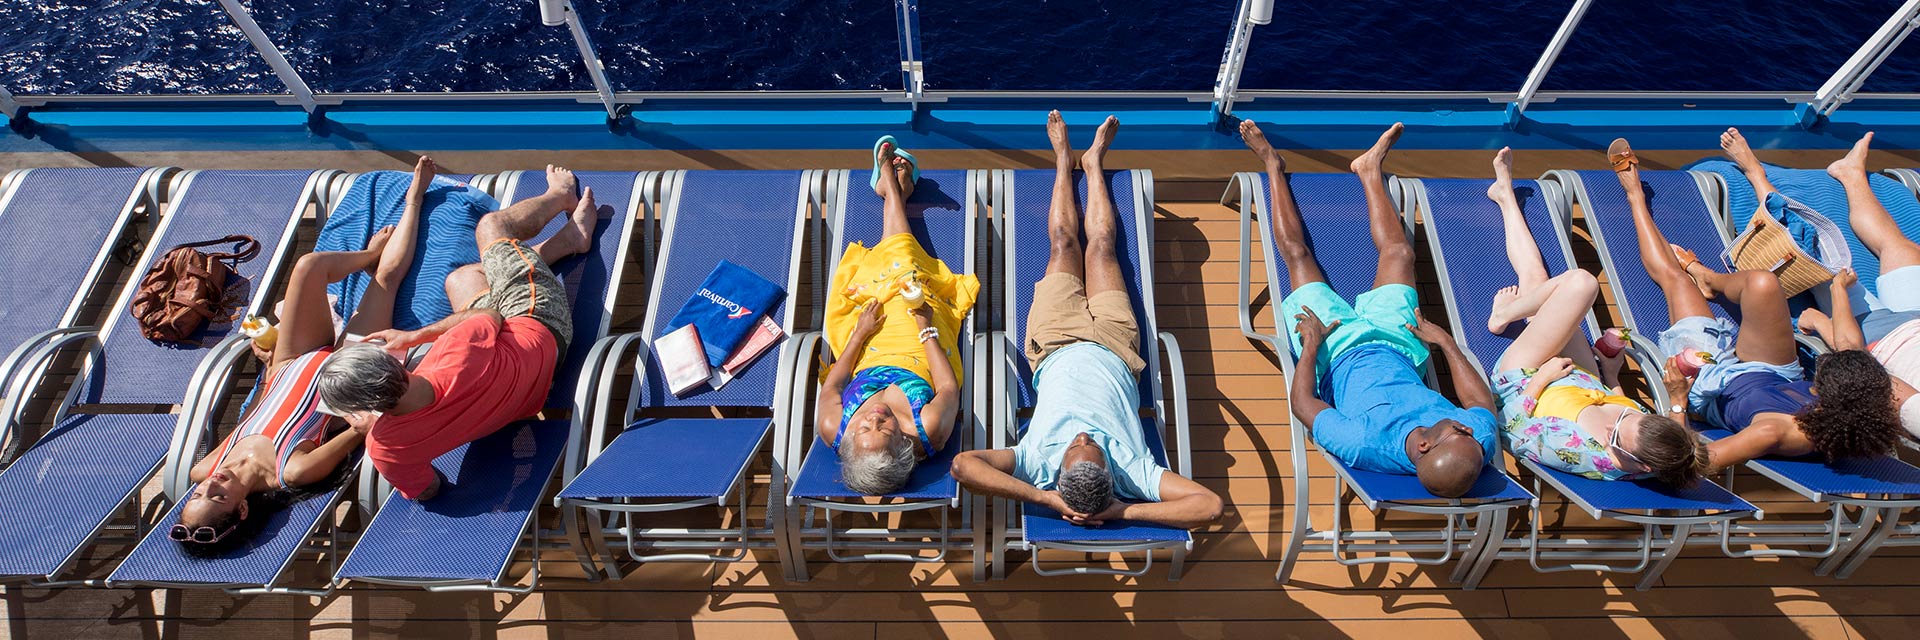 aerial view of guests lounging on pool chairs on the lido deck